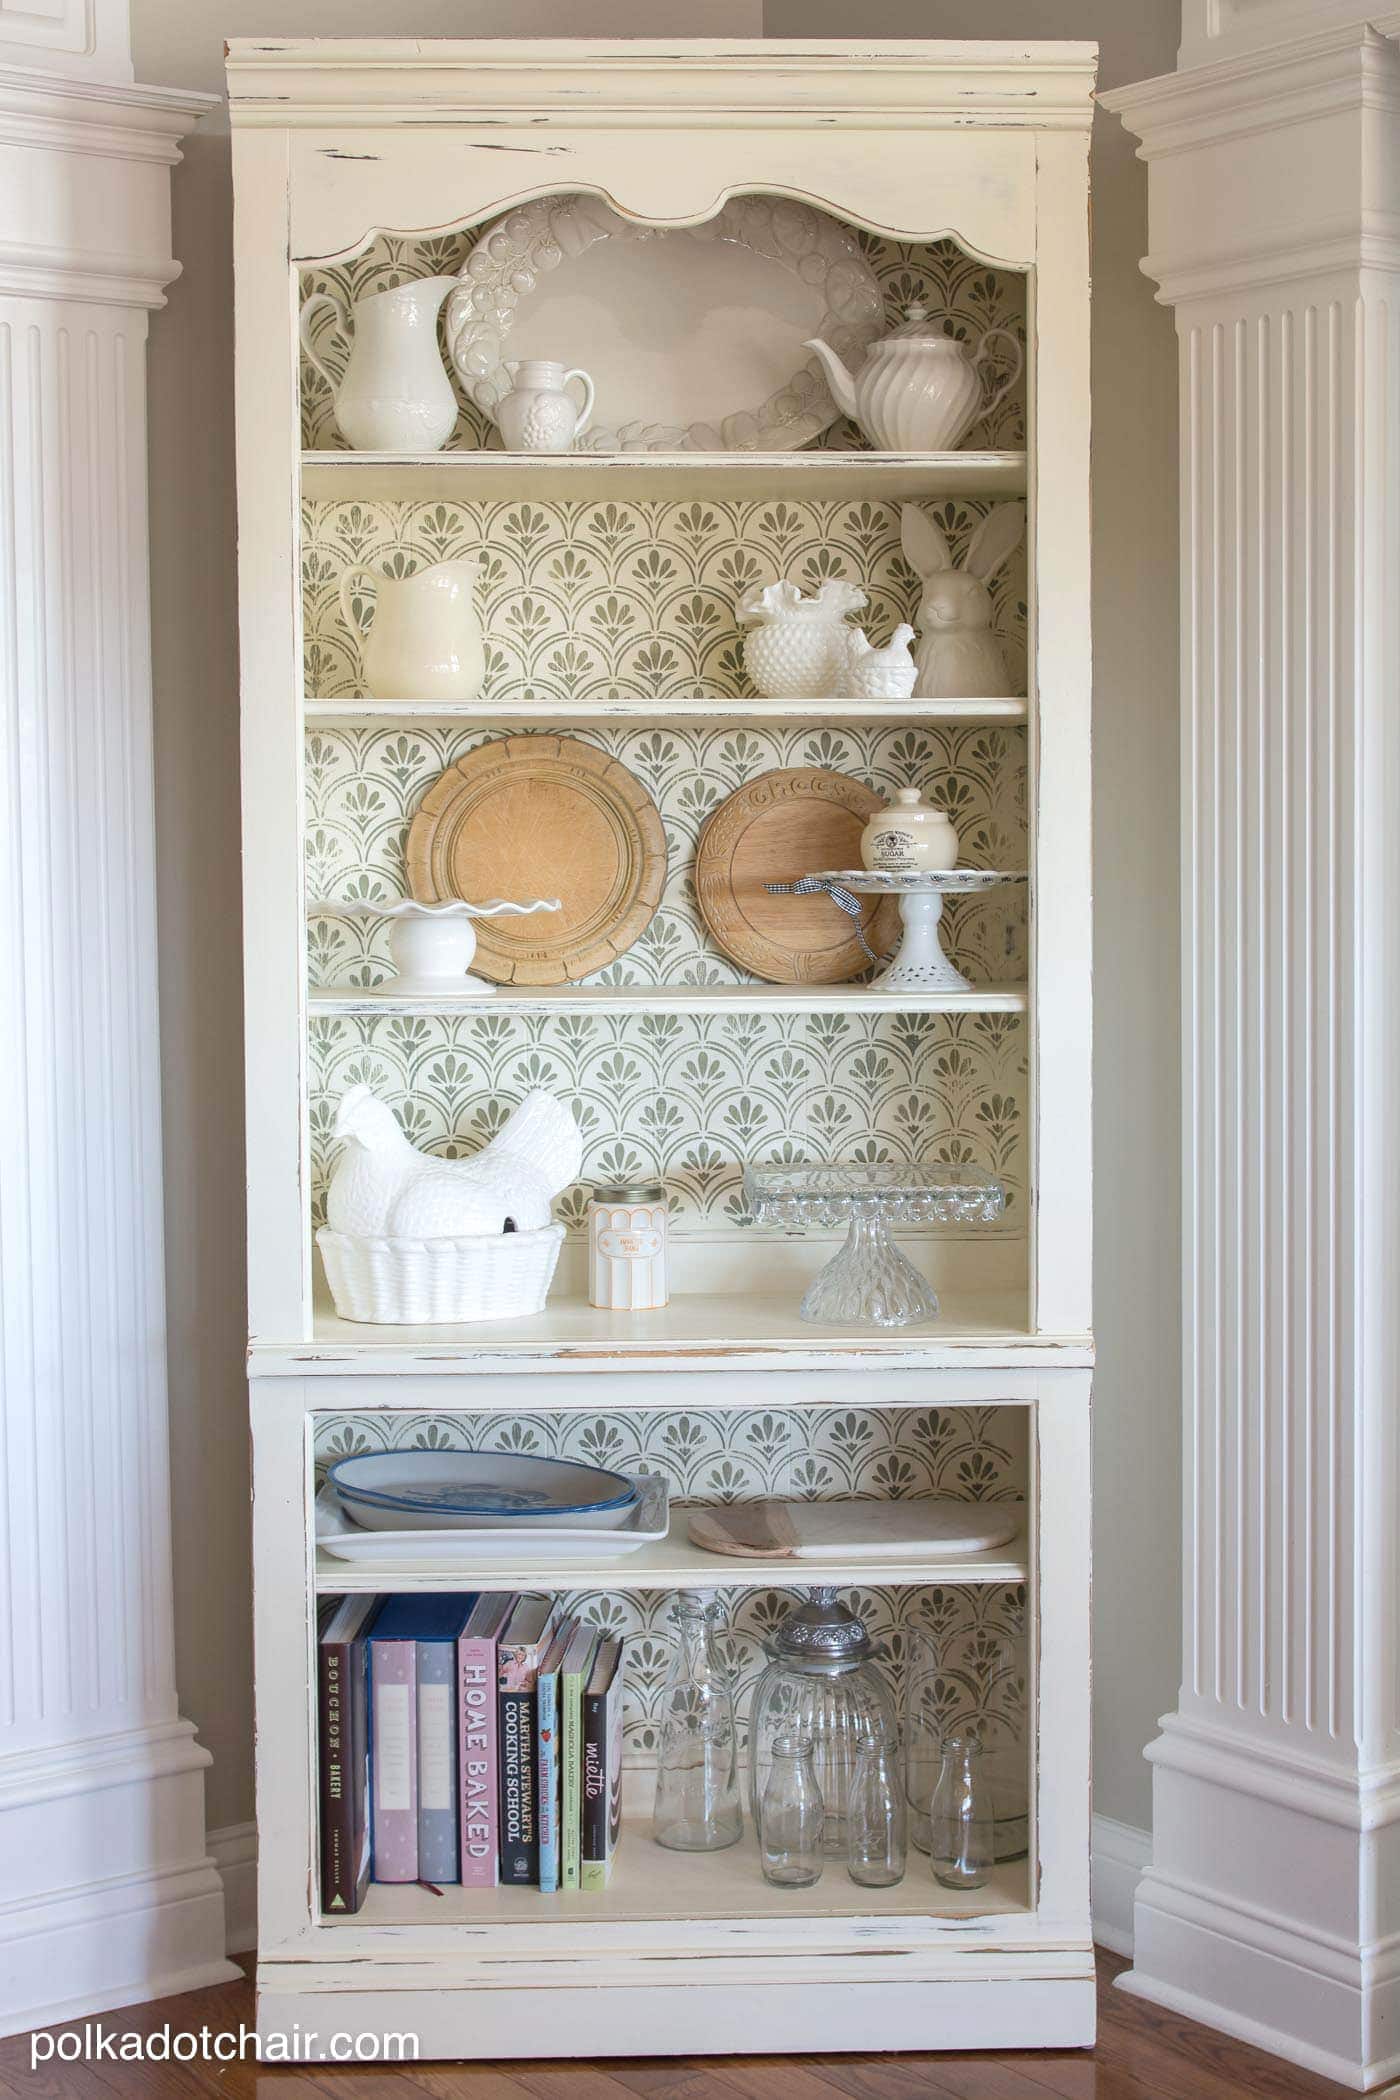 DIY Stenciled Bookcase Project, she painted the bookcase with chalk paint then stenciled a pattern onto the back, looks pretty simple